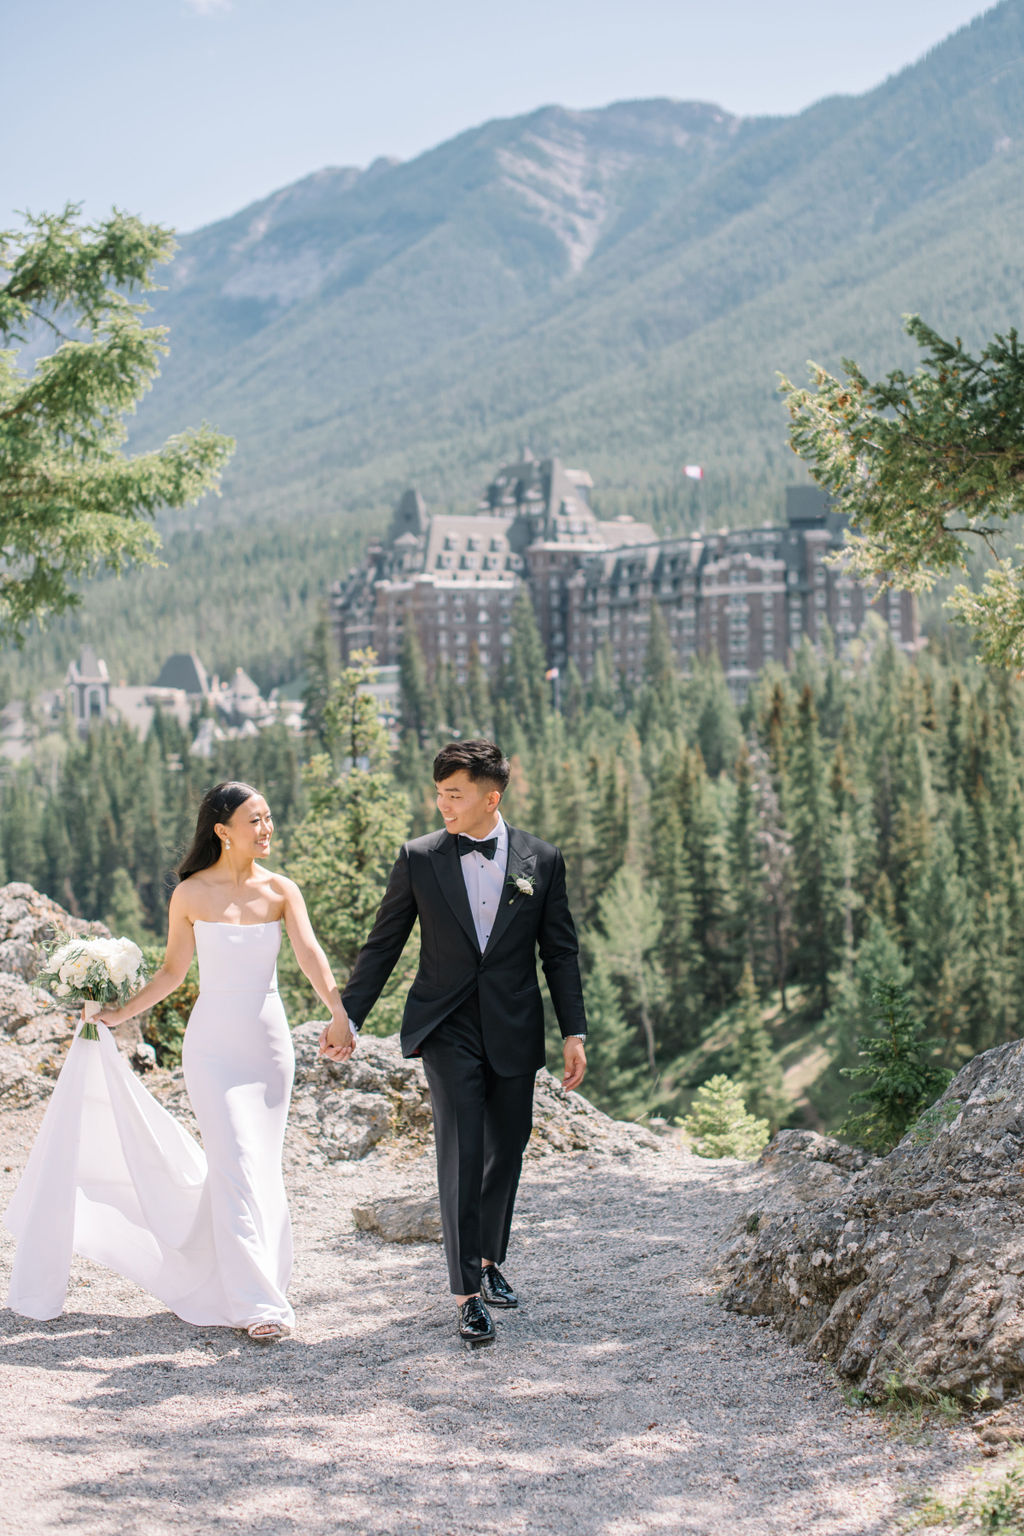 Elegant bride and groom walking holding hands in the mountains with Fairmont Banff Springs Golf and Country Club in the background.  Canadian summer mountain wedding inspiration.